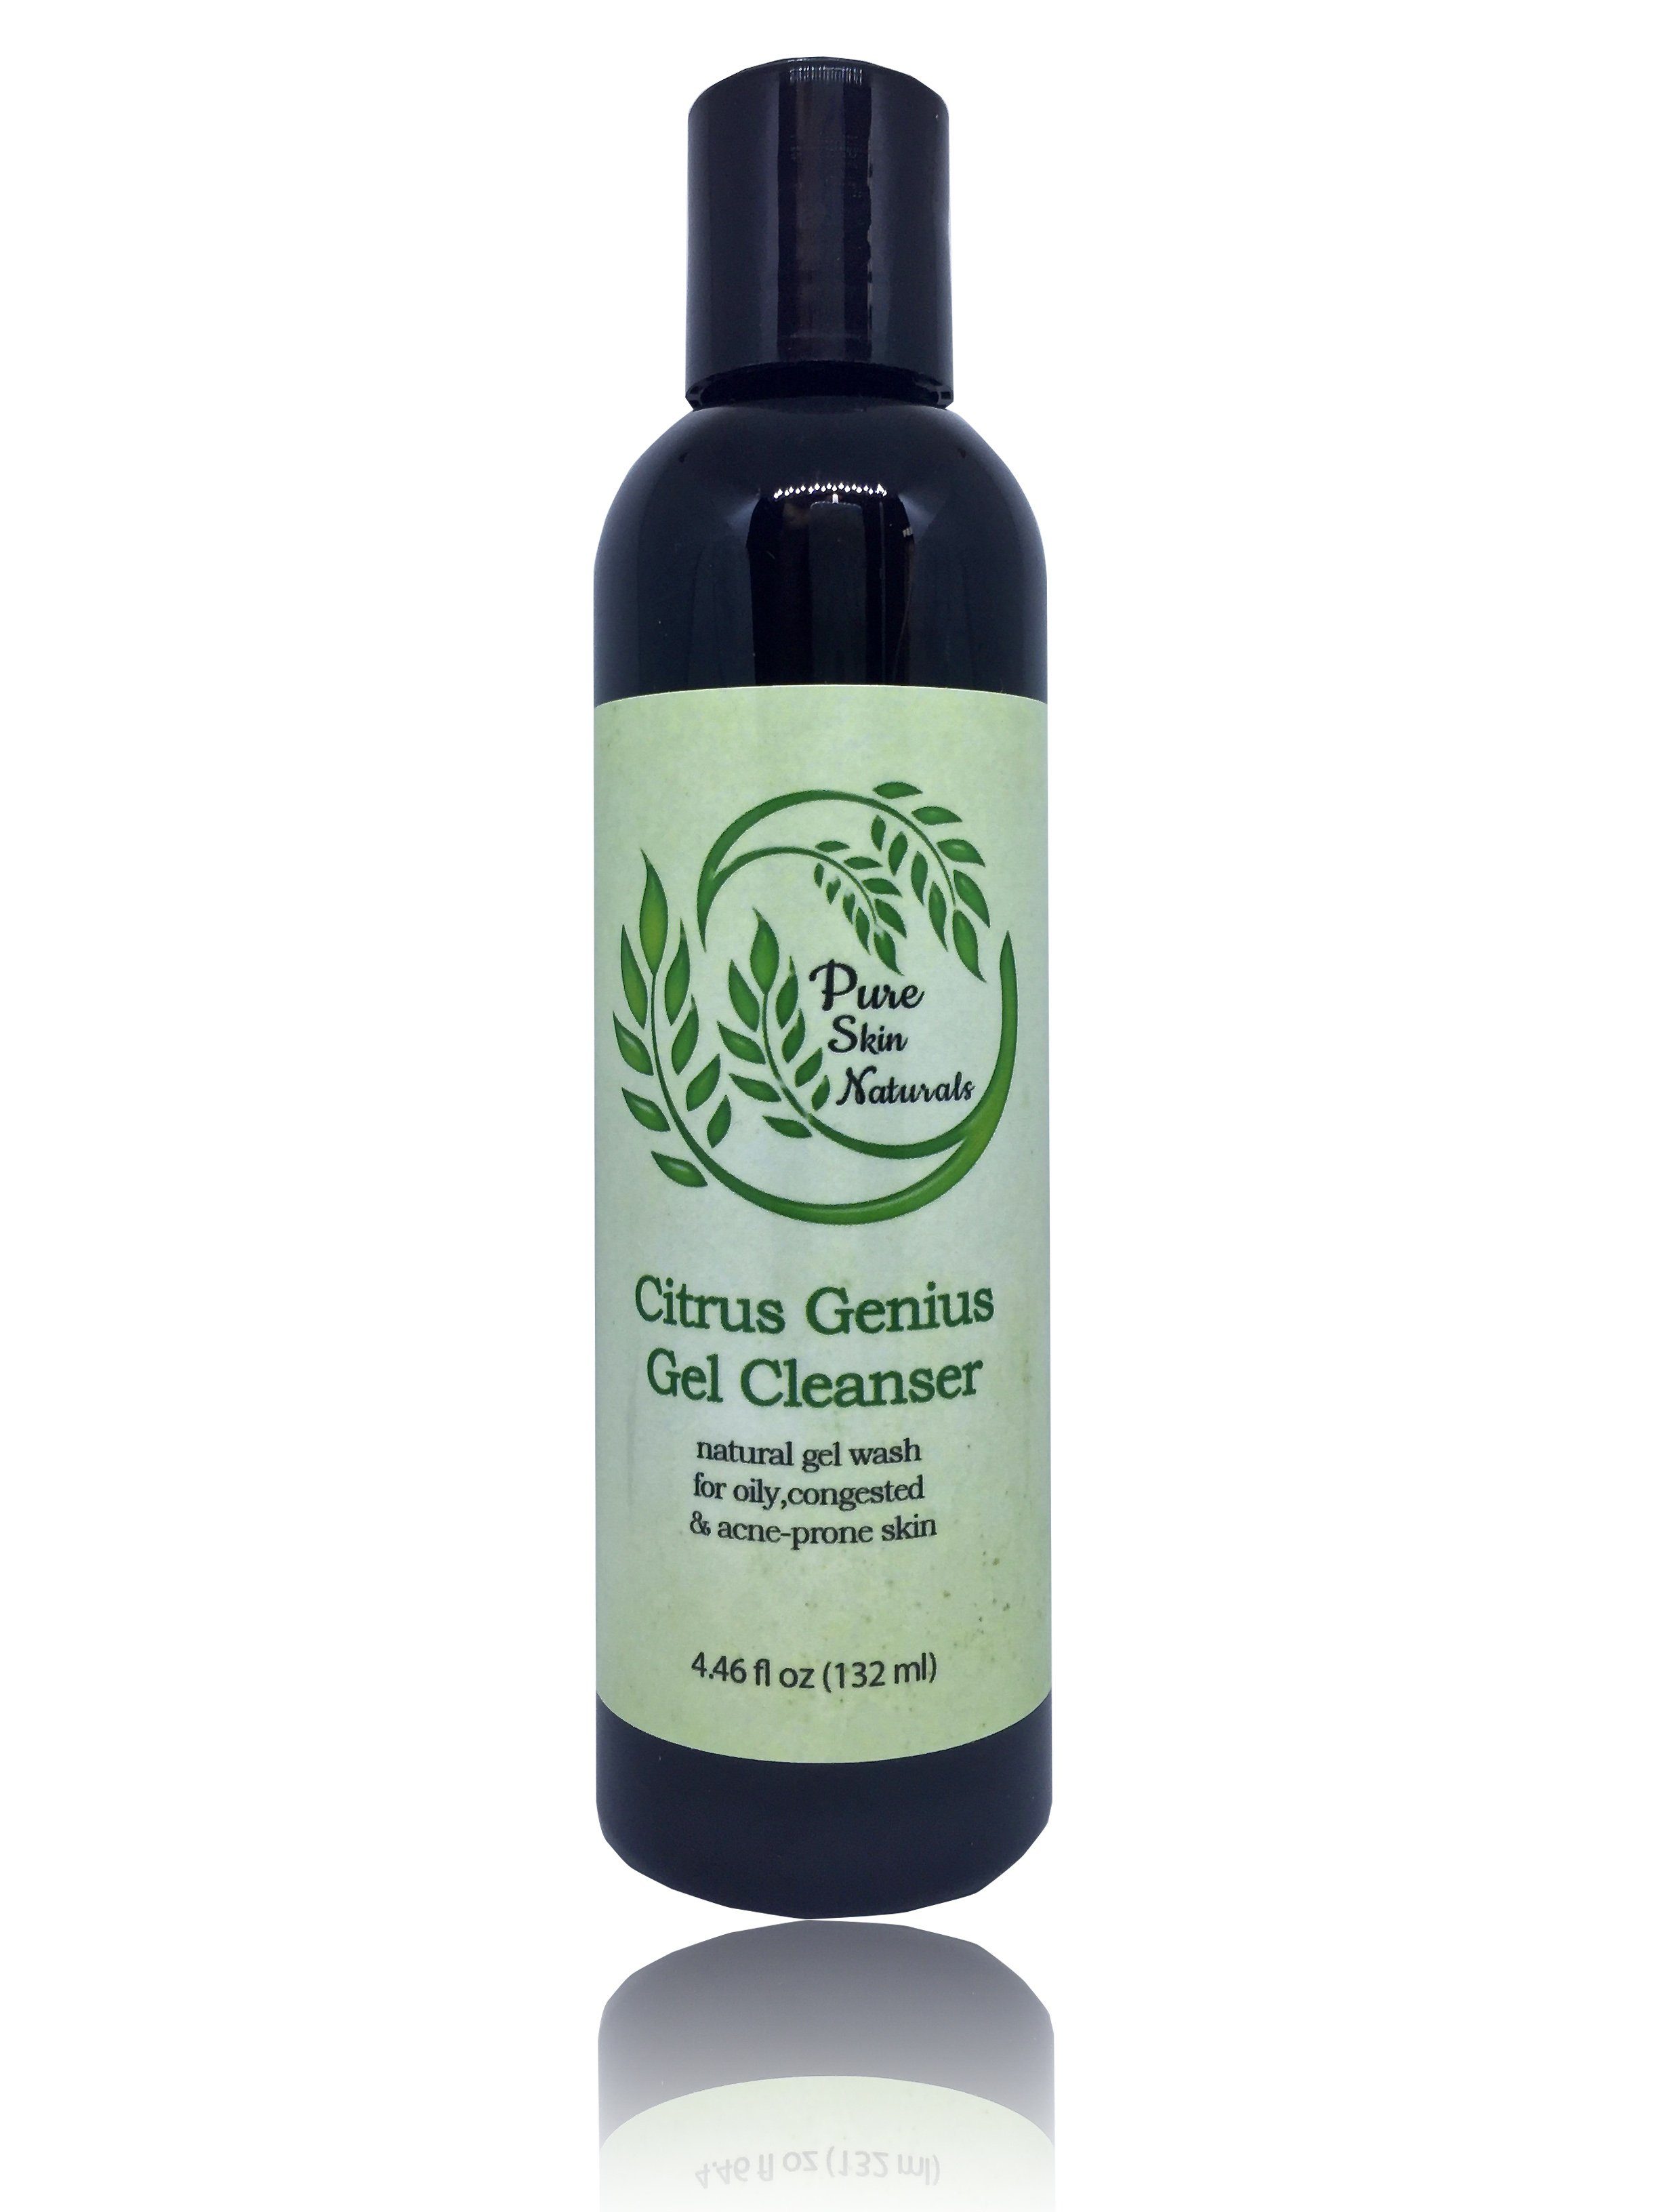 Citrus Genius Gel Cleanser a natural gel wash for oily, congested and acne-prone skin